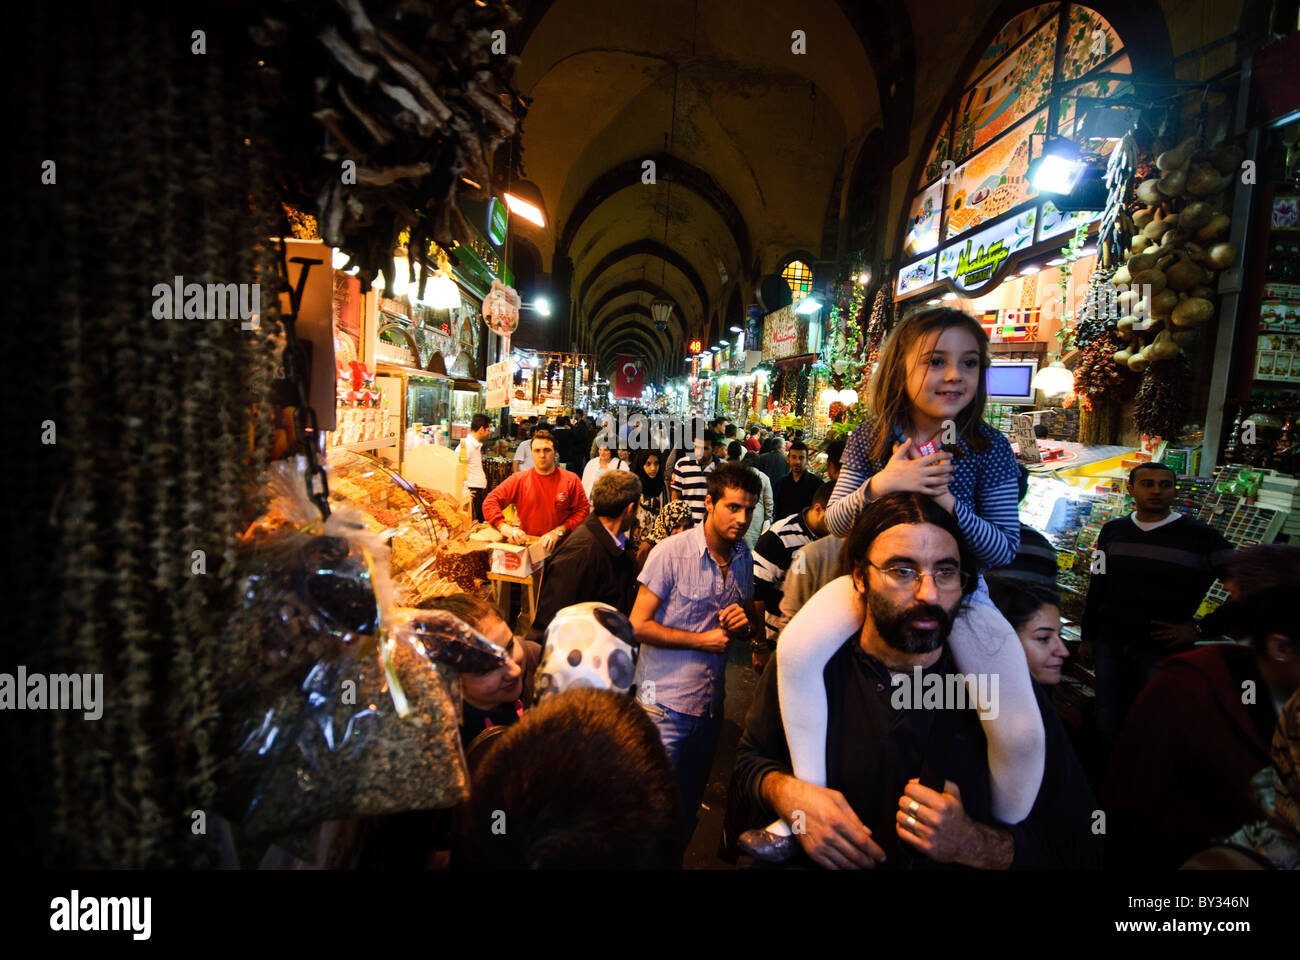 ISTANBUL, Turkey — in the Spice Bazaar (also known as the Egyption Bazaar) in Istanbul, Turkey. Established in the 17th century, this bustling marketplace remains a vital part of Istanbul's trade and gastronomic culture, with its rich aromas and vivid colors captivating both locals and tourists alike. Stock Photo